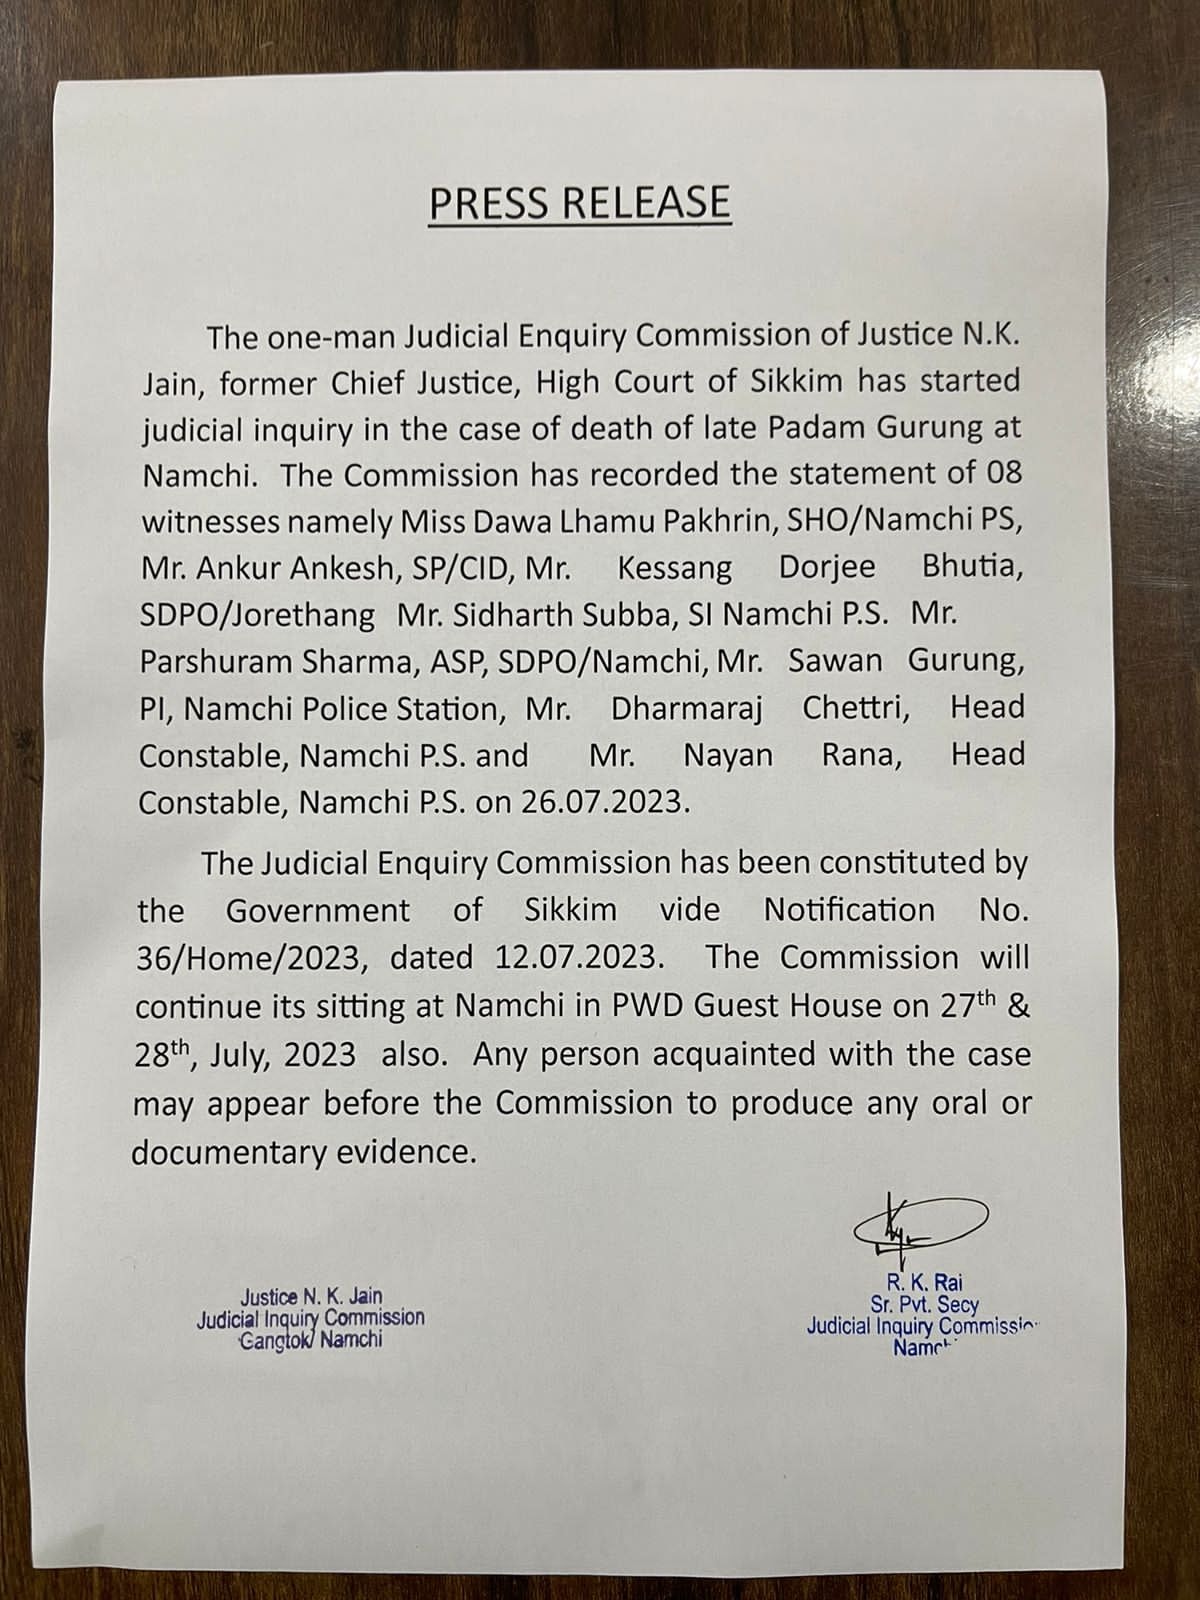 One-Man Judicial Enquiry Commission Begins Investigation into Late Padam Gurung’s Death